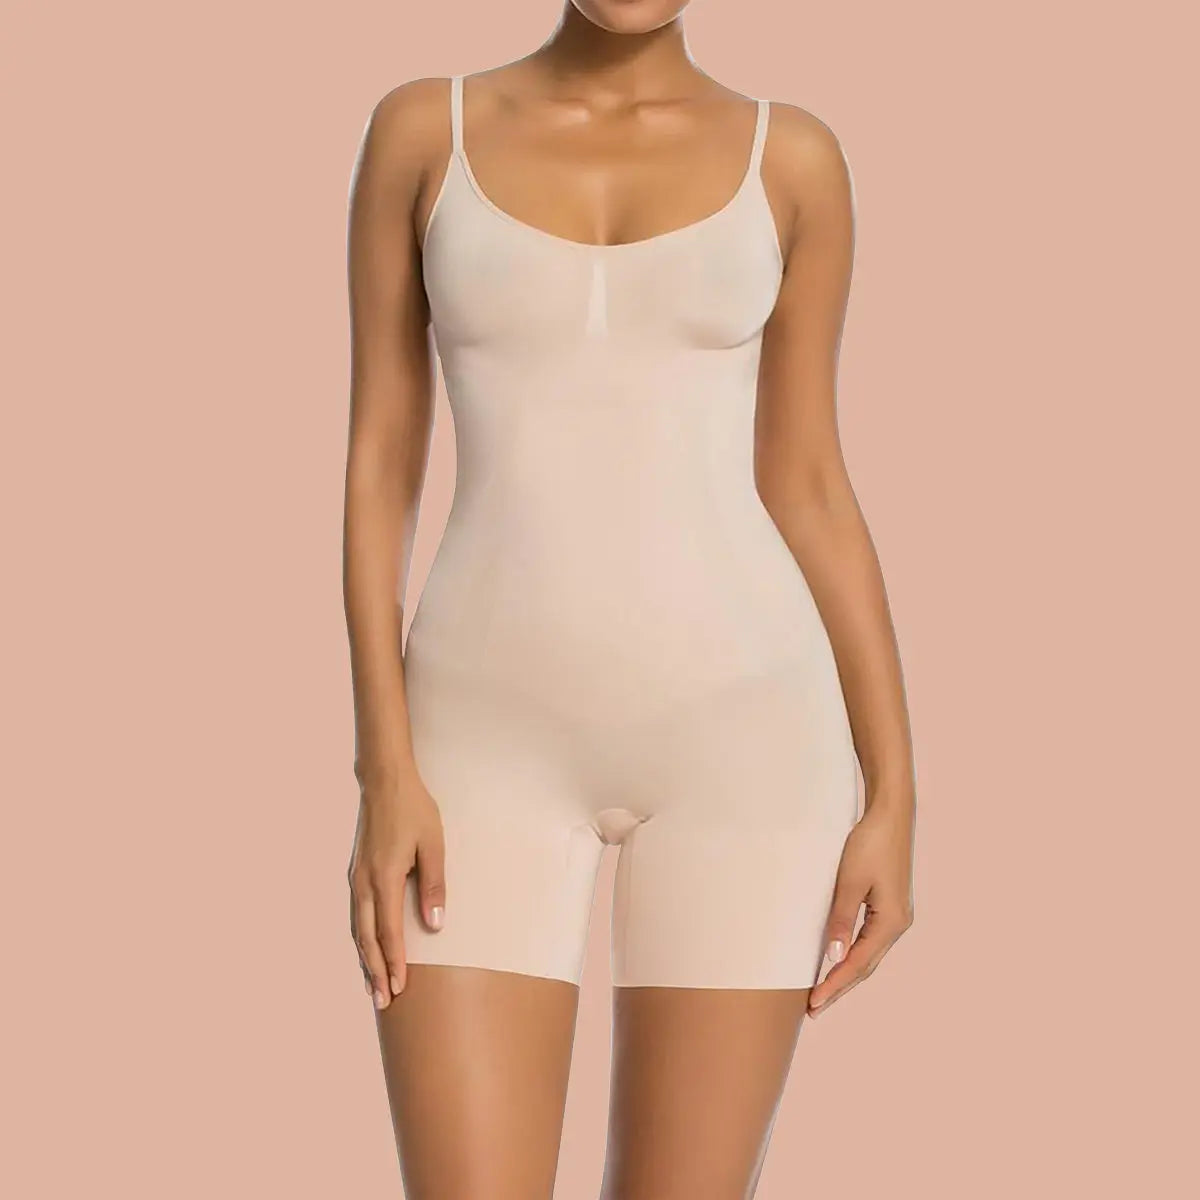 I need to get both of these @SHAPERX bodysuits in black & white too! #